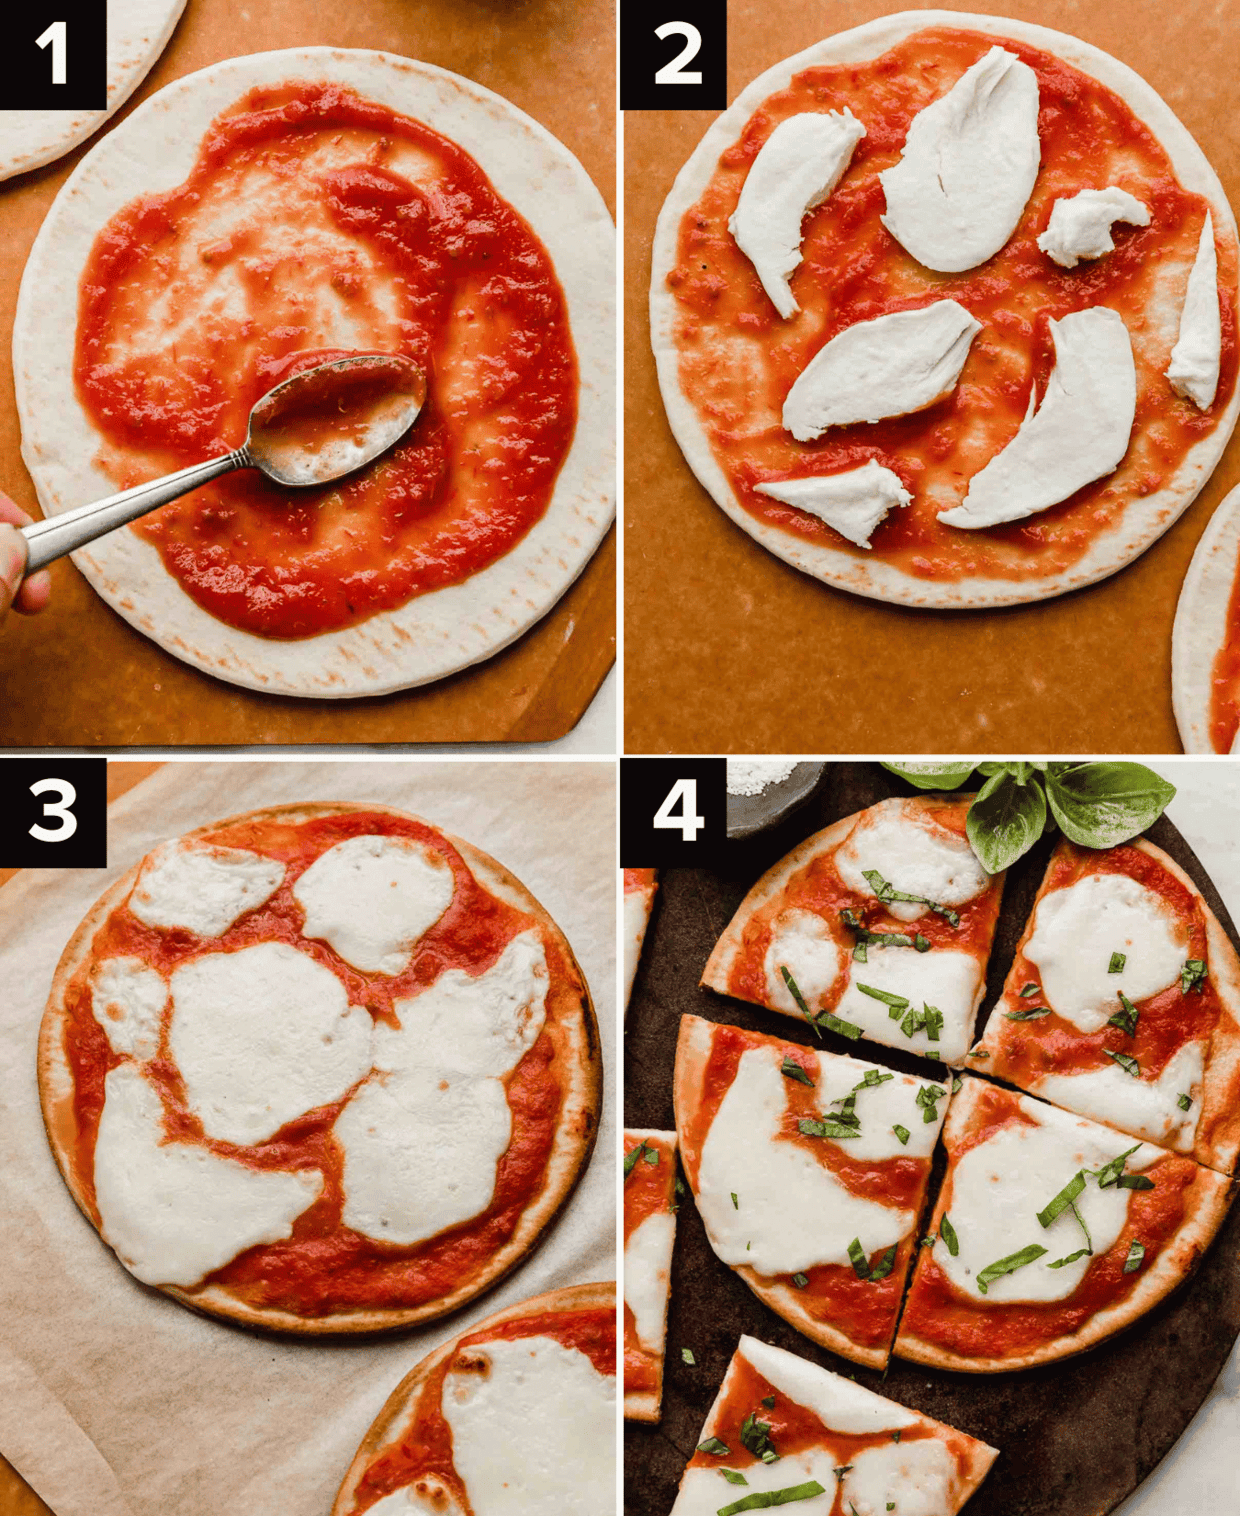 Four images showing how to make Margherita Flatbread pizza, top left image is red tomato sauce being spread over flatbread with the backside of a spoon, top right is fresh mozzarella over a Margherita Flatbread, bottom left image is baked and melted Margherita Flatbread pizza on parchment paper, bottom right image is fresh basil topped Margherita Flatbread pizza.